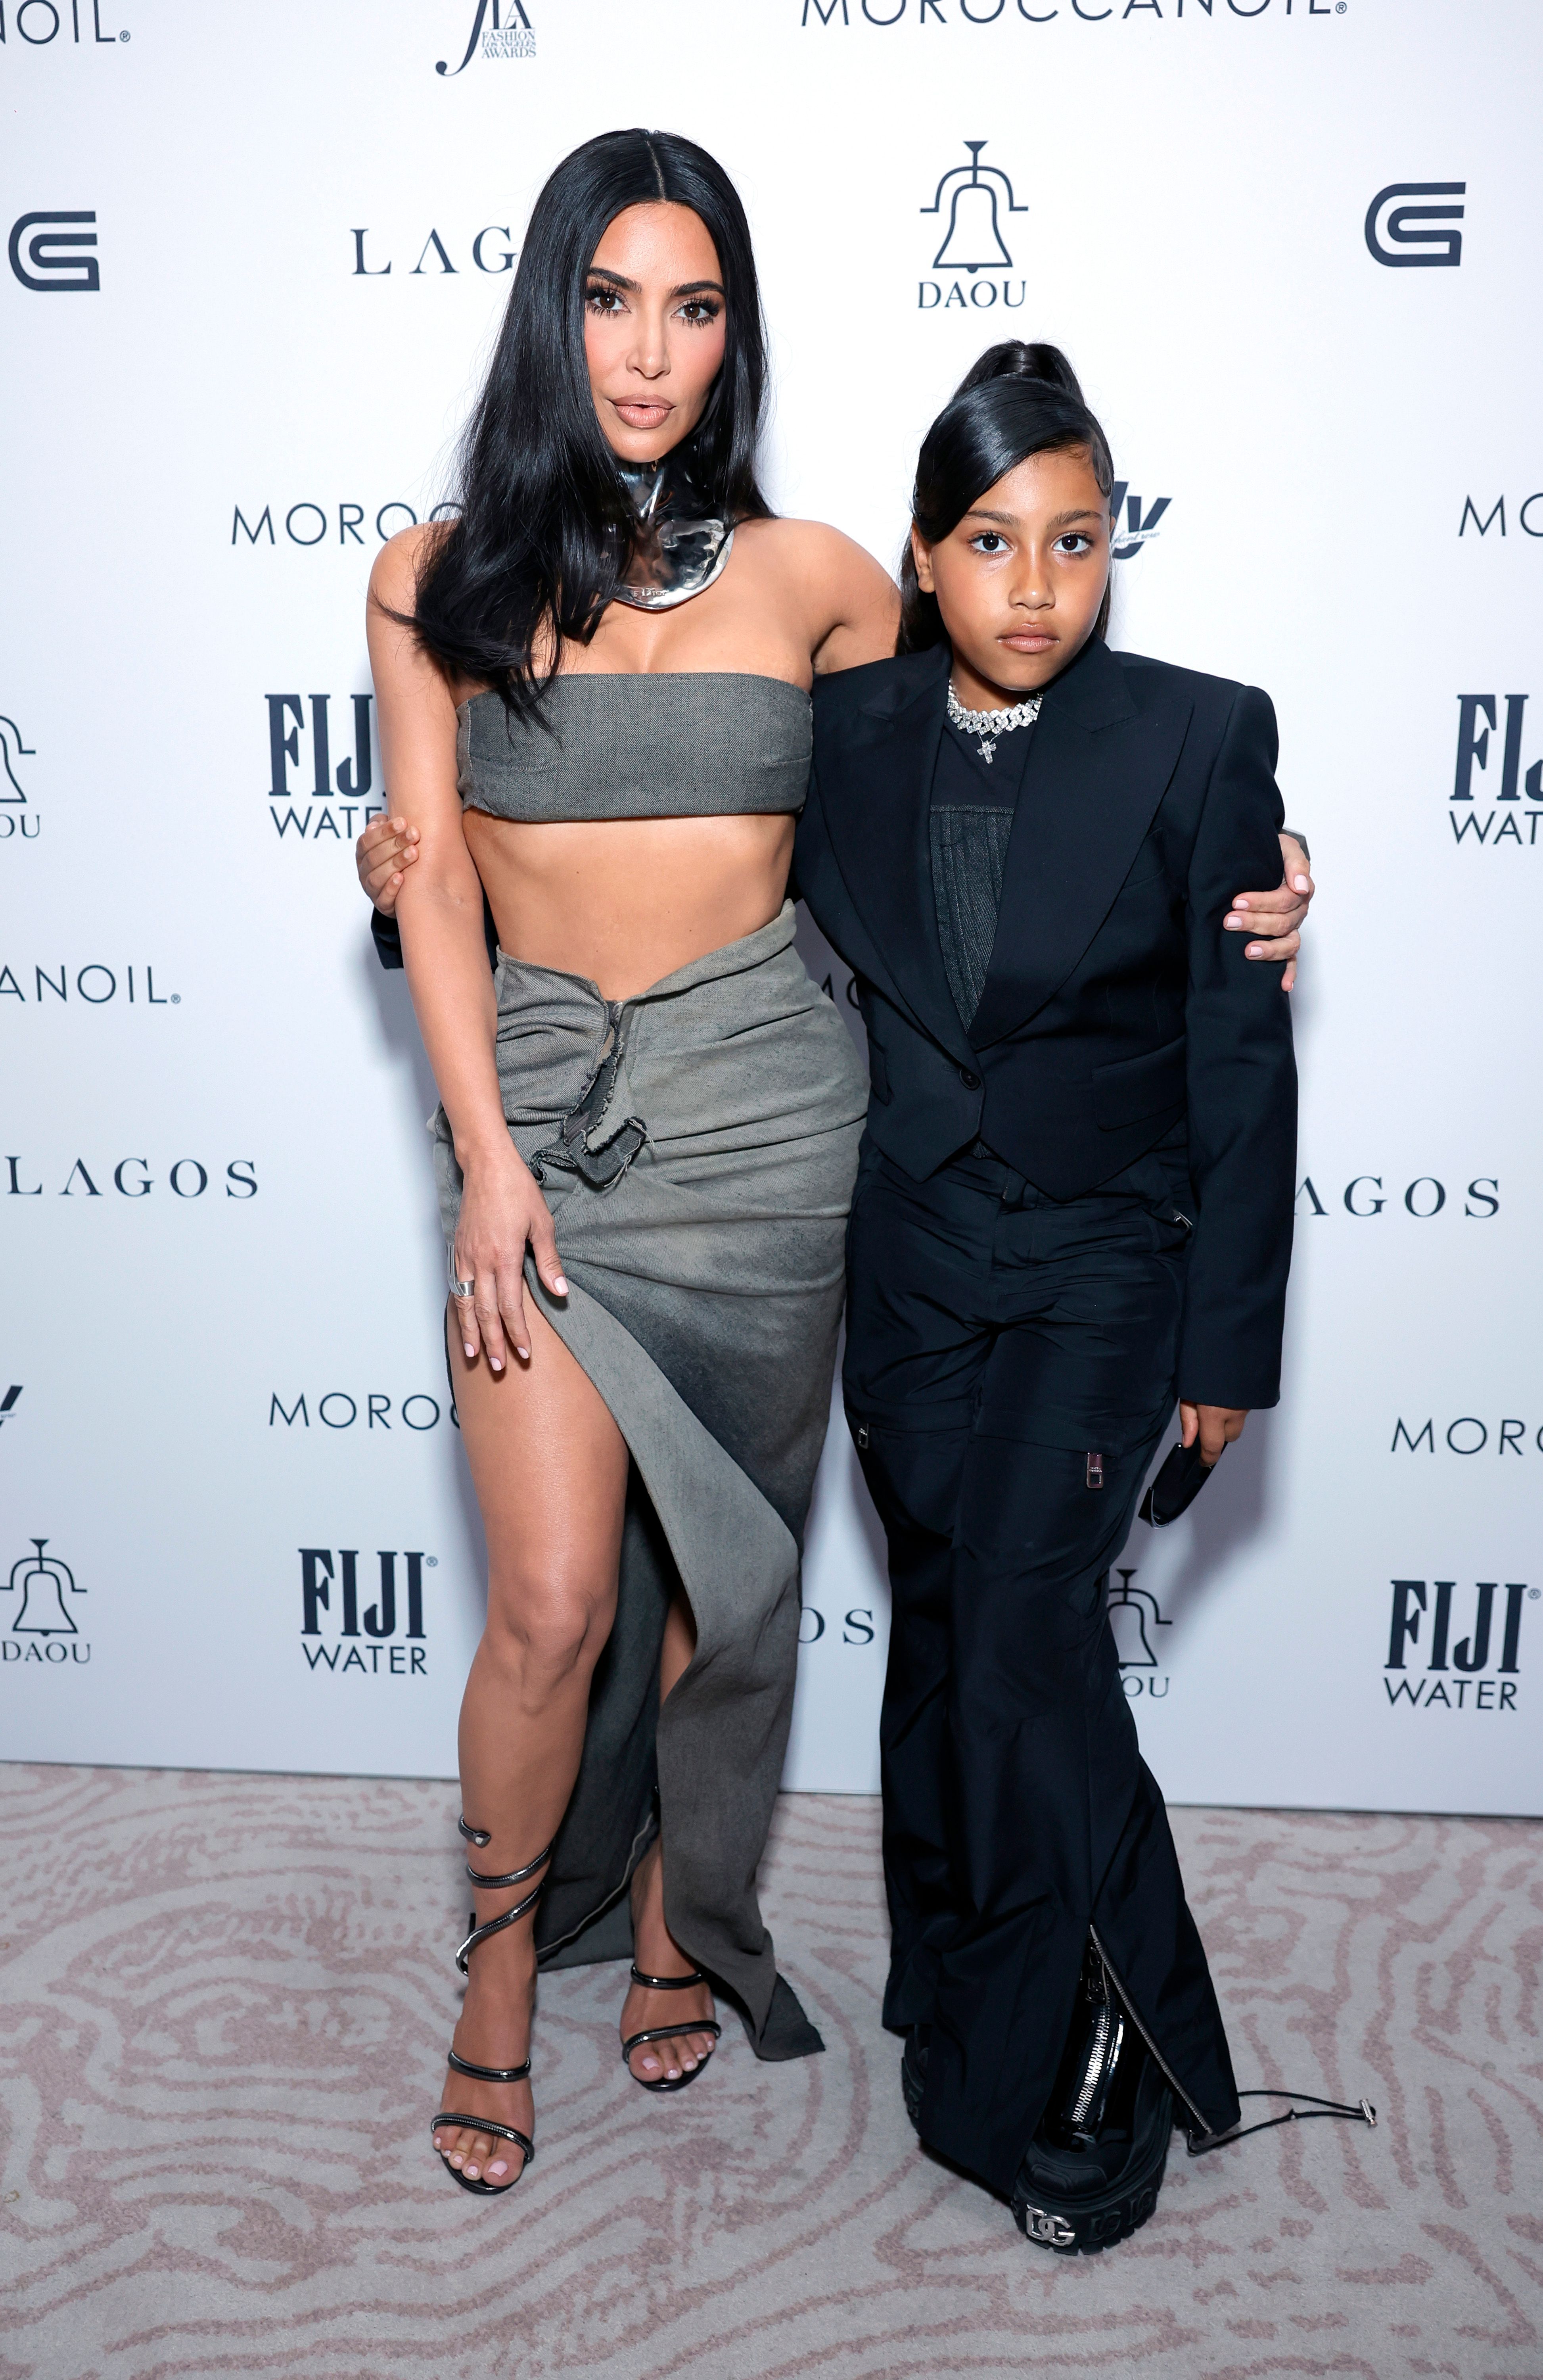 North has become known to embarrass her mom on TikTok by taking videos of the Skims mogul without her knowledge